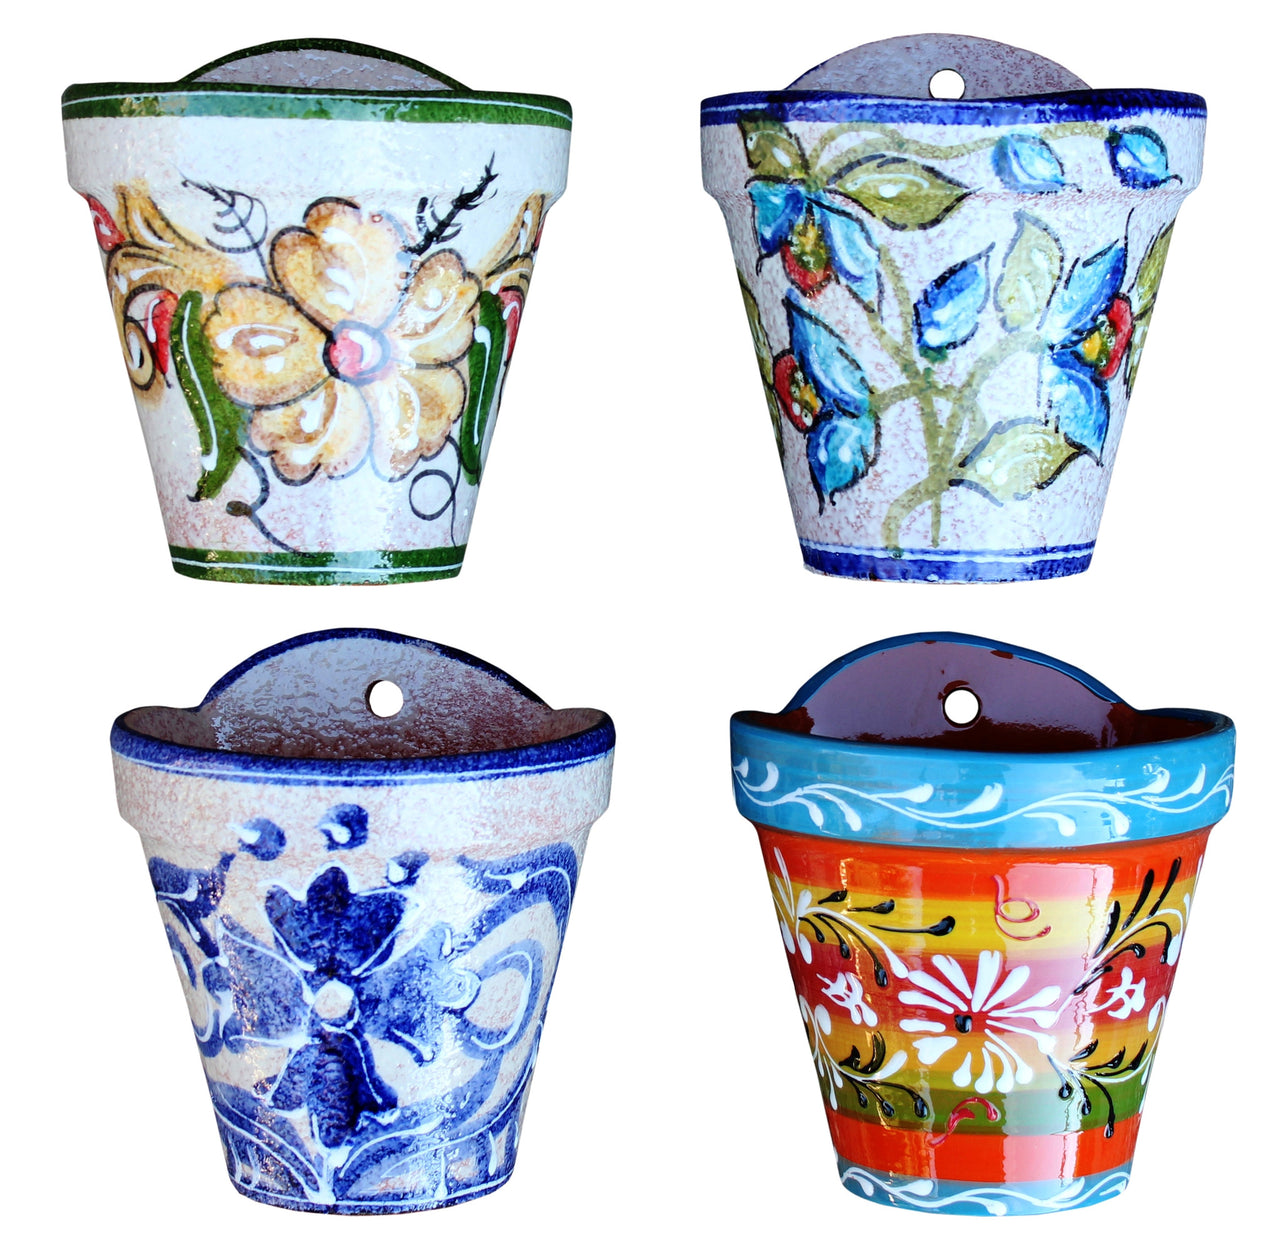 Wall Hanging Flower Pot (Blue Corazon) - Hand Painted in Spain